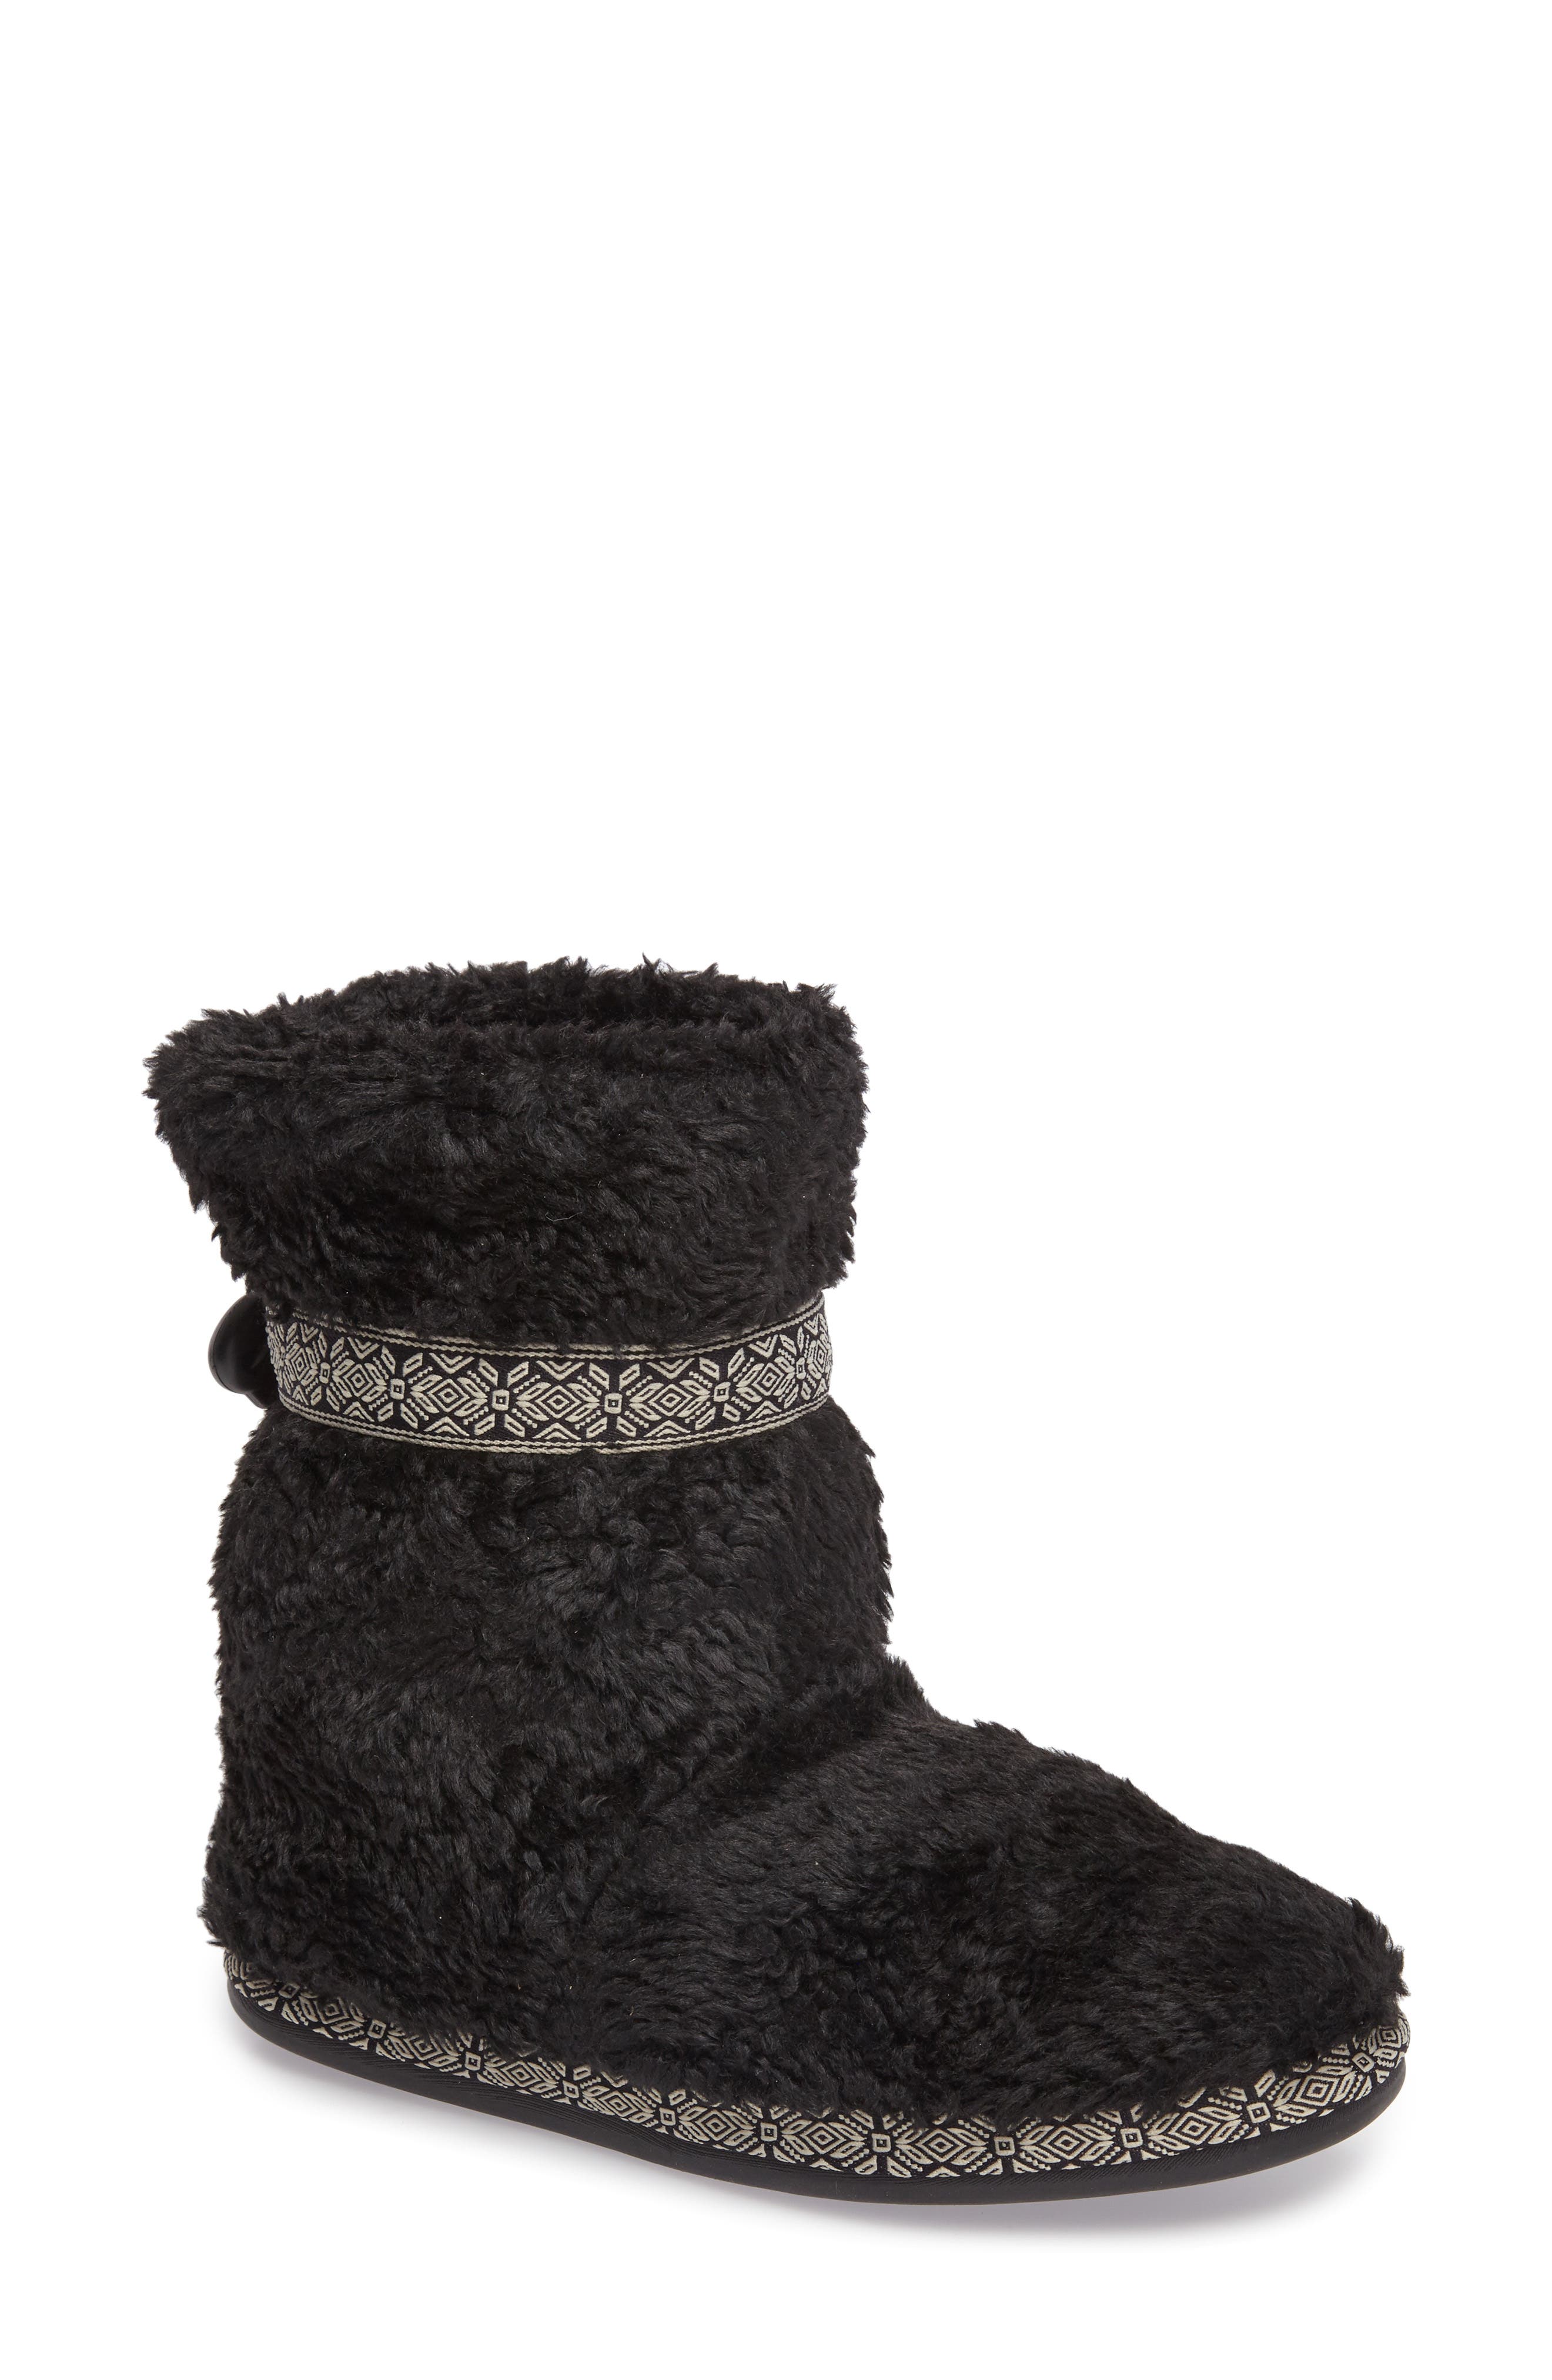 woolrich slippers canada